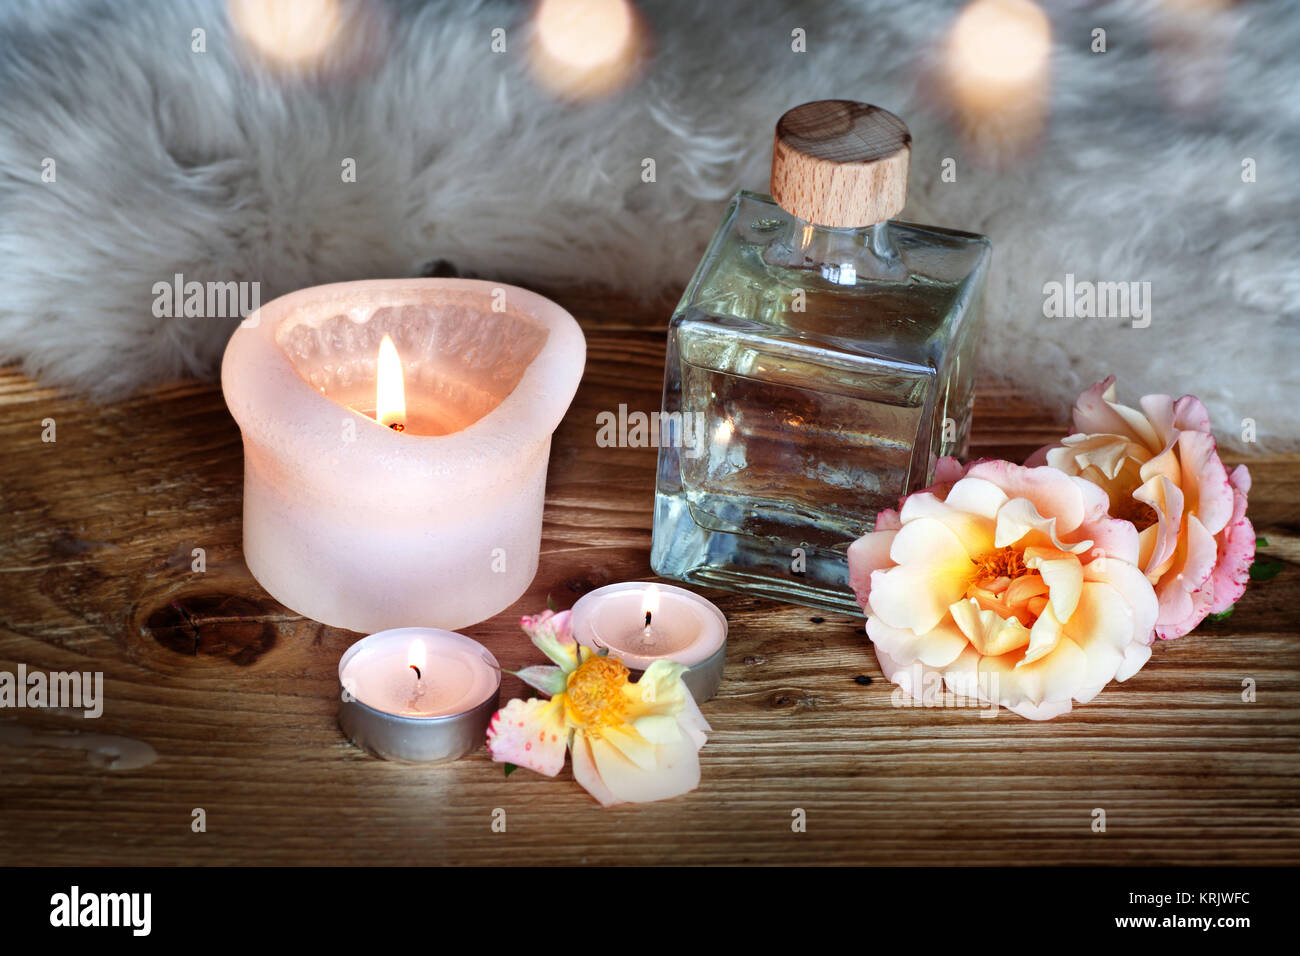 spa decoration with aromatic oil Stock Photo